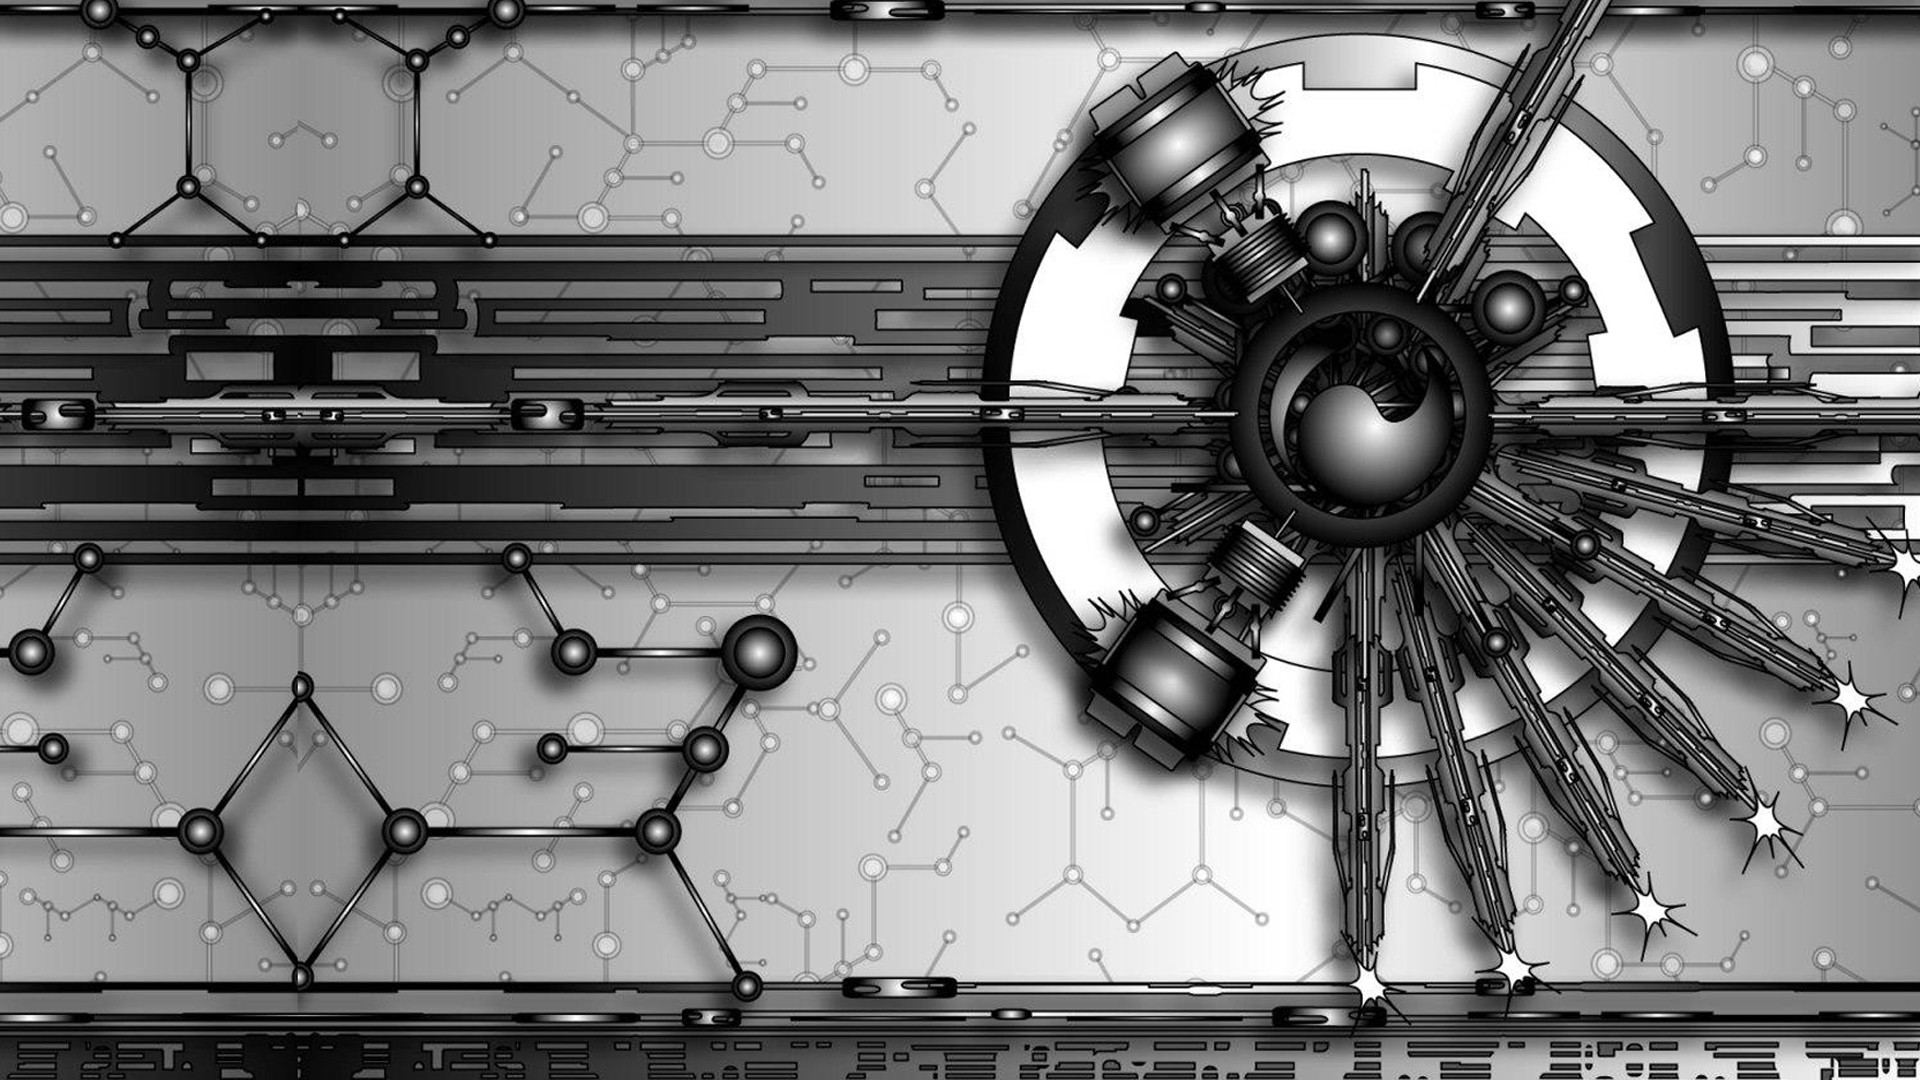 Wallpaper, abstract, metal, technology, gray, vector art, angle, wheel, graphics, 1920x1080 px, computer wallpaper, black and white, monochrome photography 1920x1080